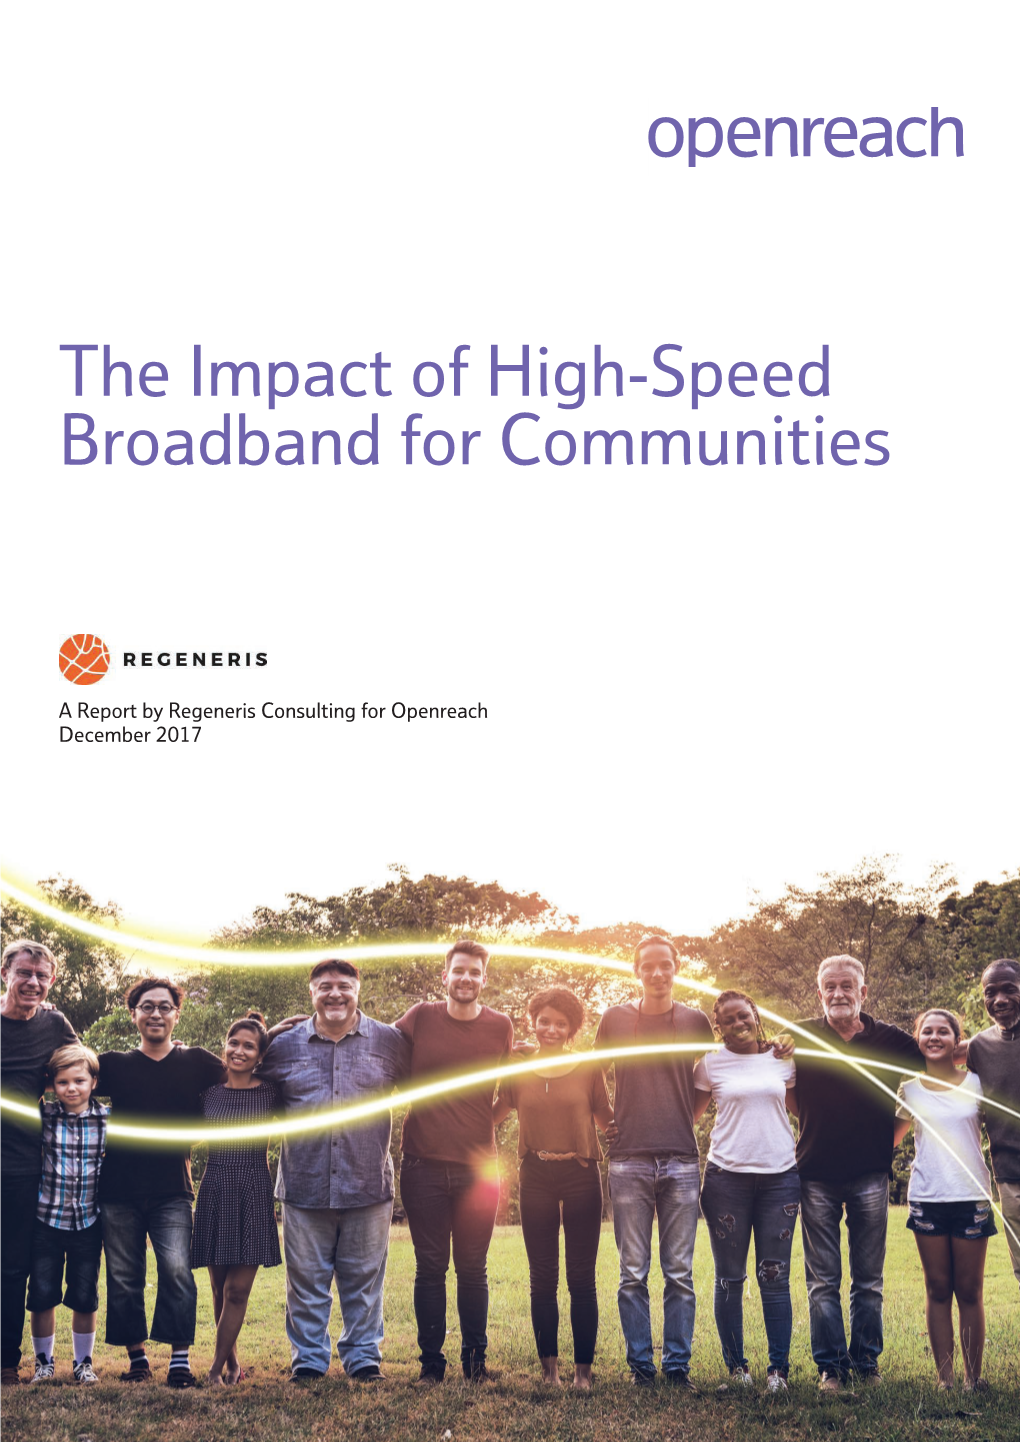 The Impact of High-Speed Broadband for Communities